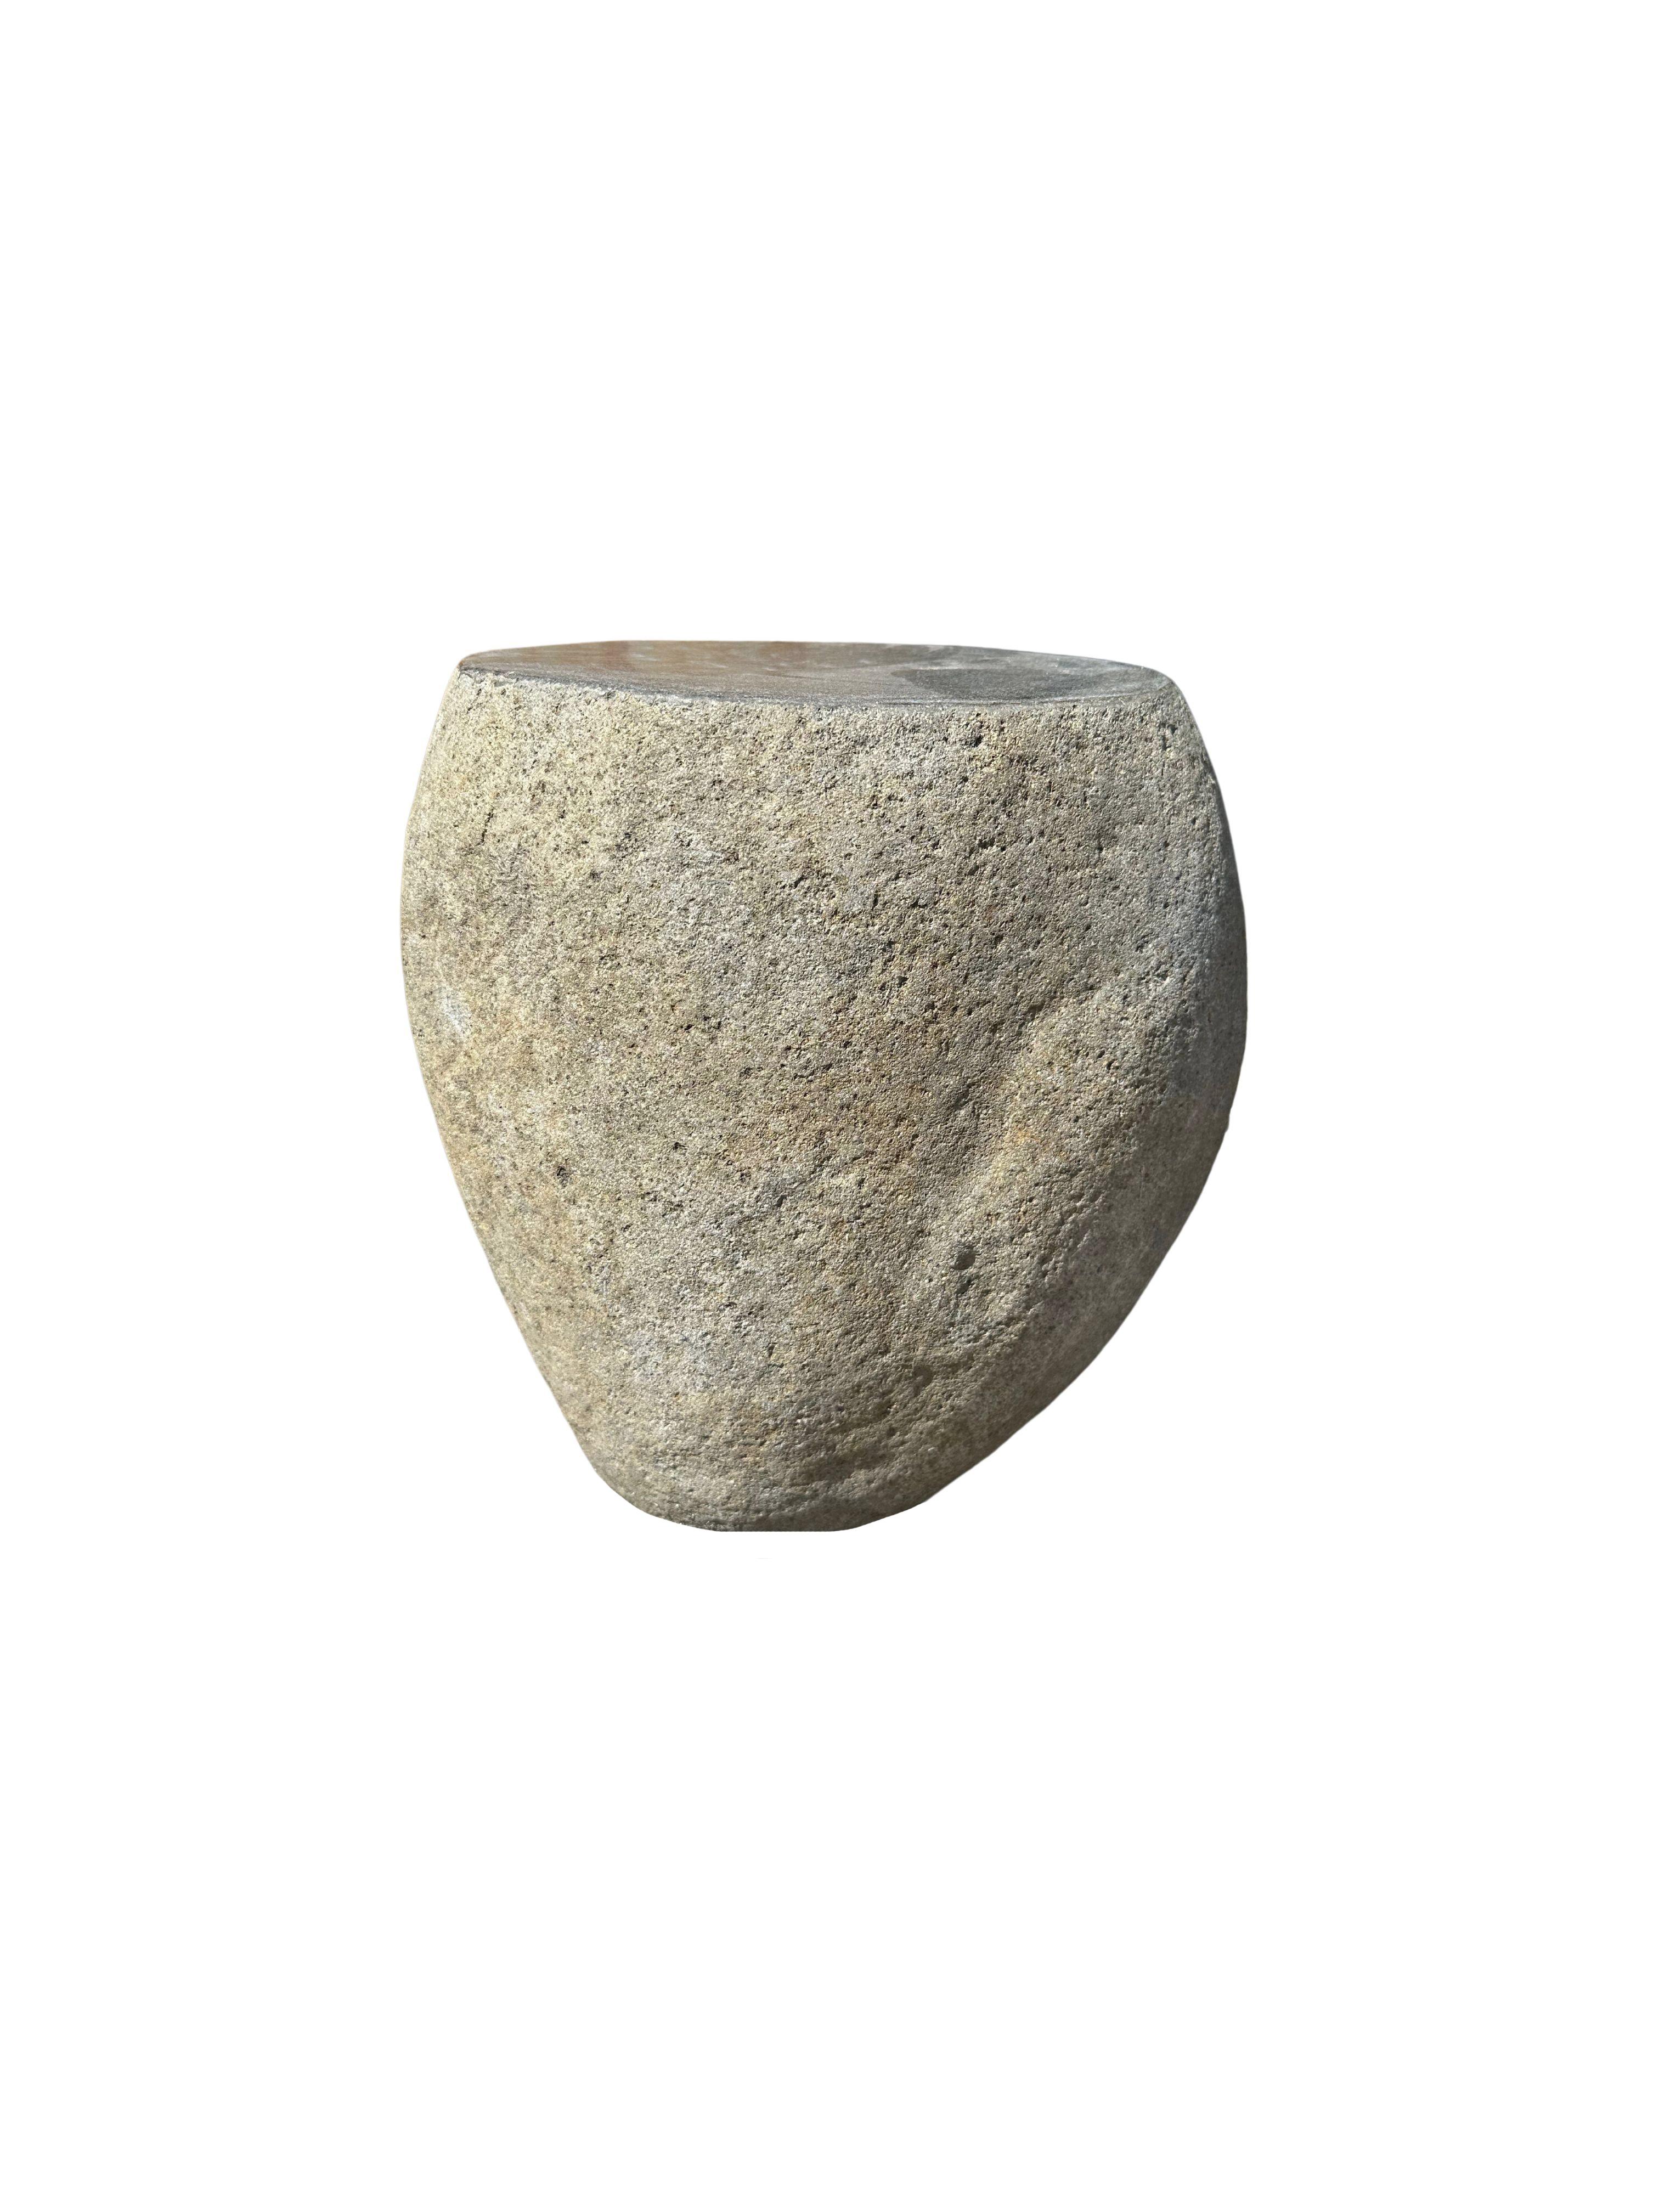 Organic Modern Solid Stone Side Table / Pedestal from Java, Indonesia